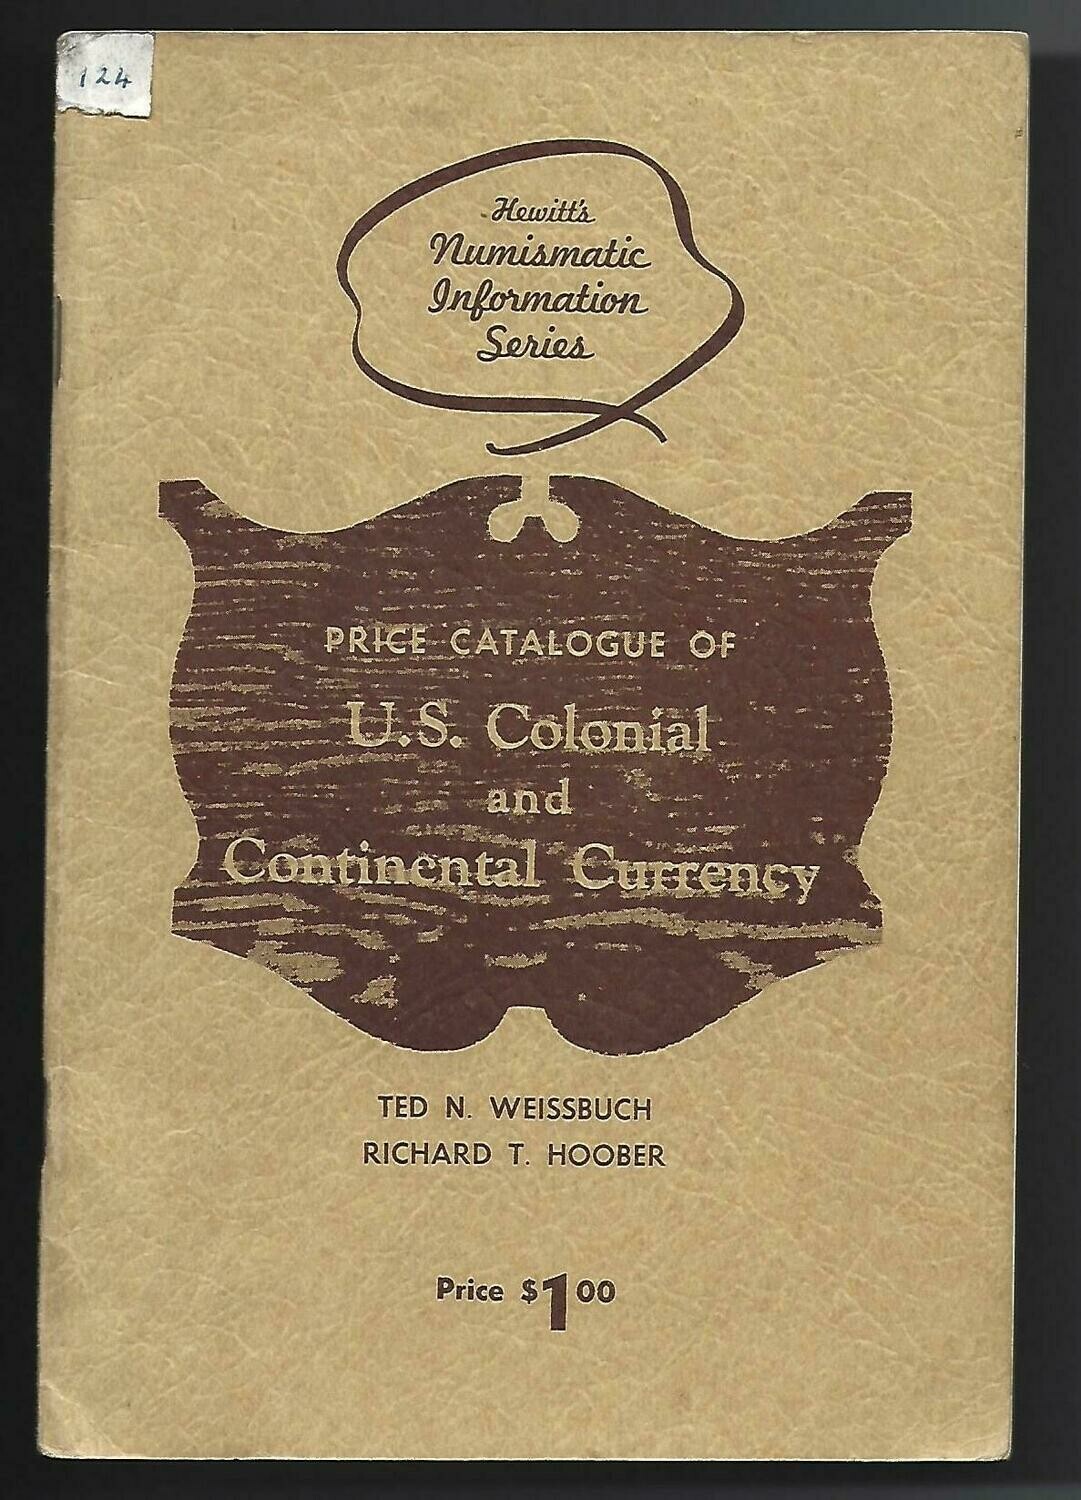 World; Ted N. Weissbuch & Richard T. Hoober, "Price Catalogue of U.S. Colonial and Cotinental Currency."